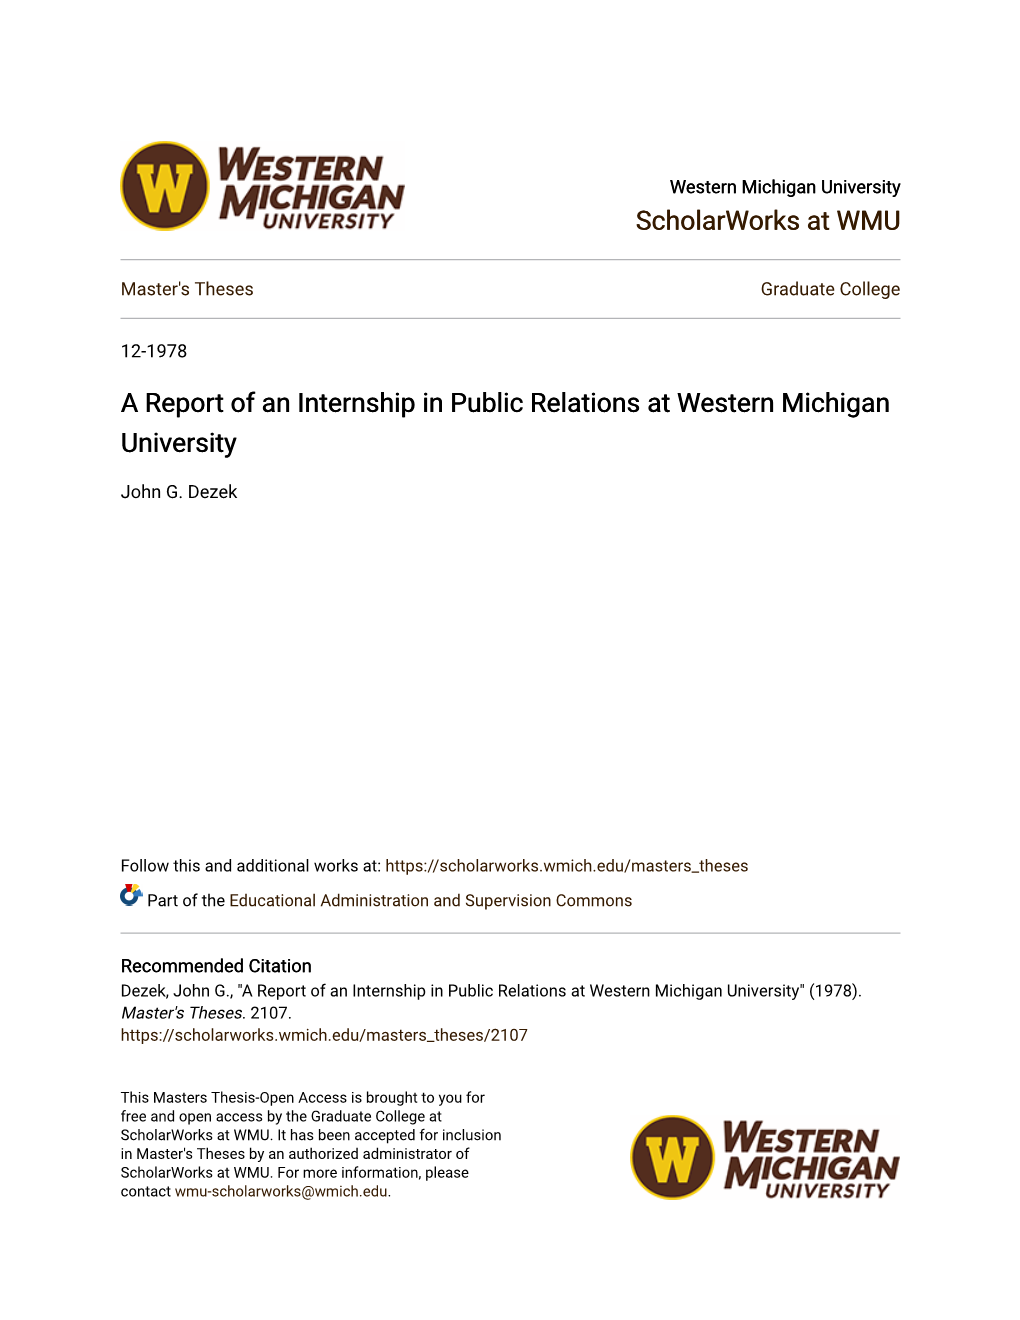 A Report of an Internship in Public Relations at Western Michigan University